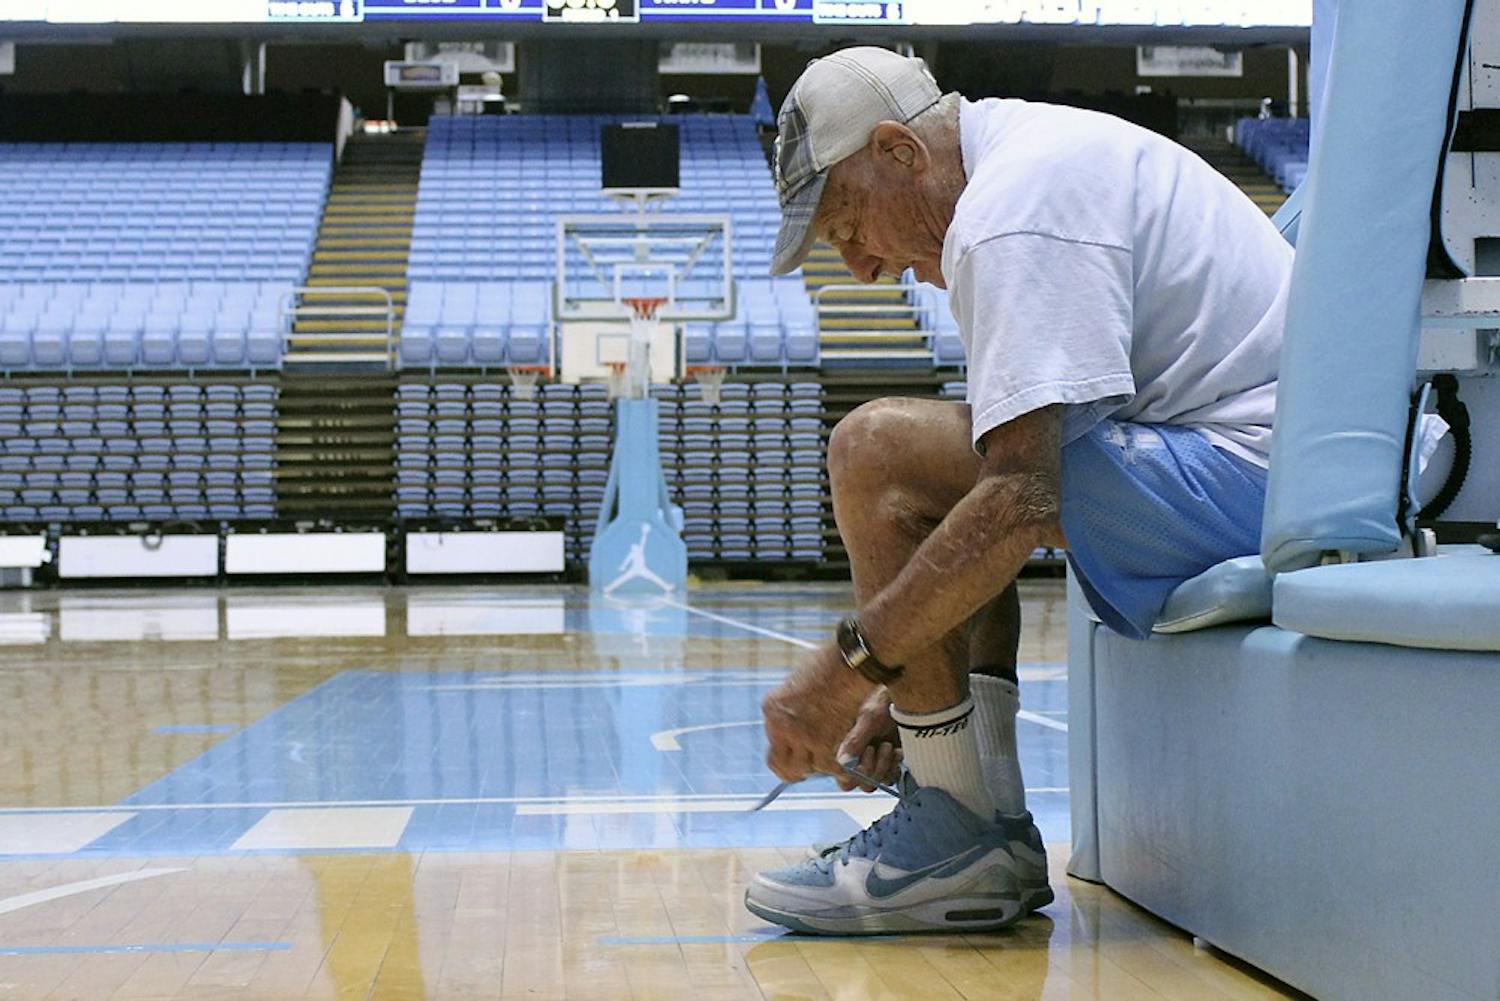 During the 1950s, Bob Gersten was instrumental in bringing New York basketball players to North Carolina to play for former Tar Heel coach Frank McGuire.